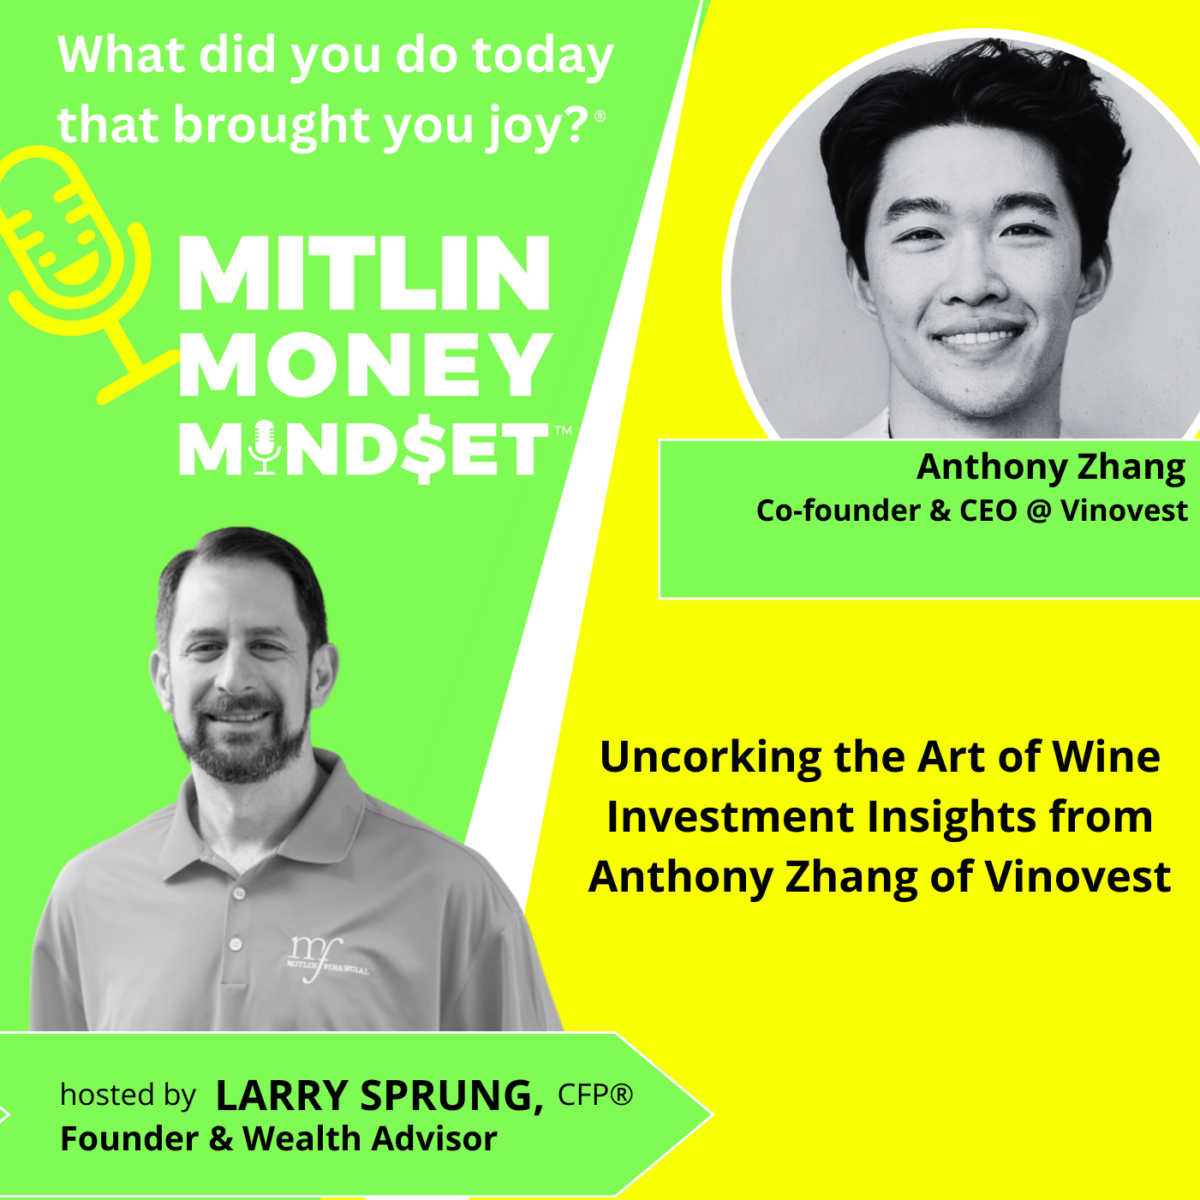 Uncorking the Art of Wine Investment Insights from Anthony Zhang of Vinovest, Episode #182